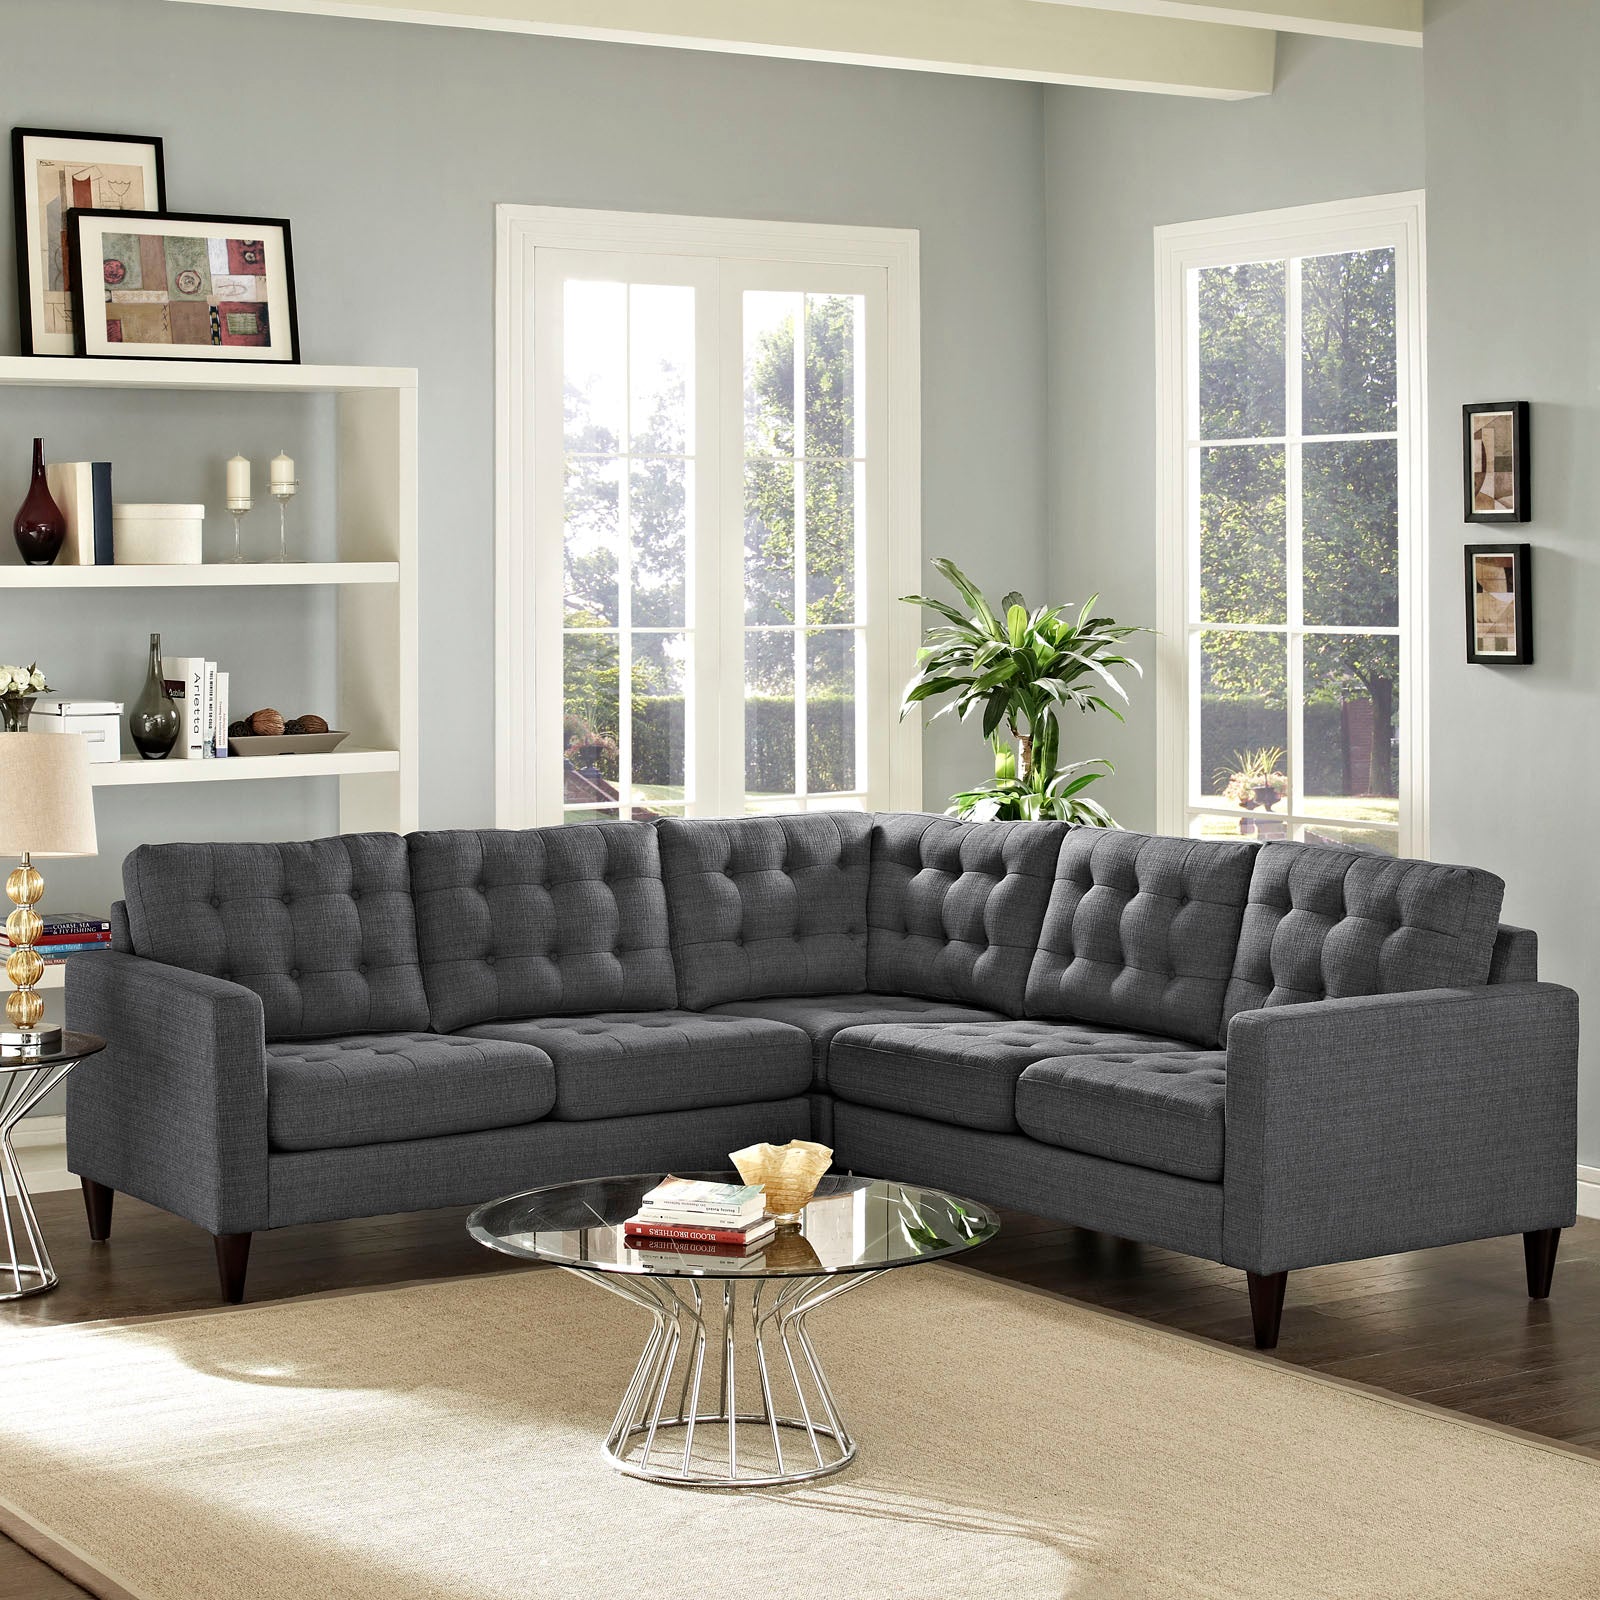 Modway Sectional Sofas - Empress 3 Piece Upholstered Fabric Sectional Sofa Set Gray